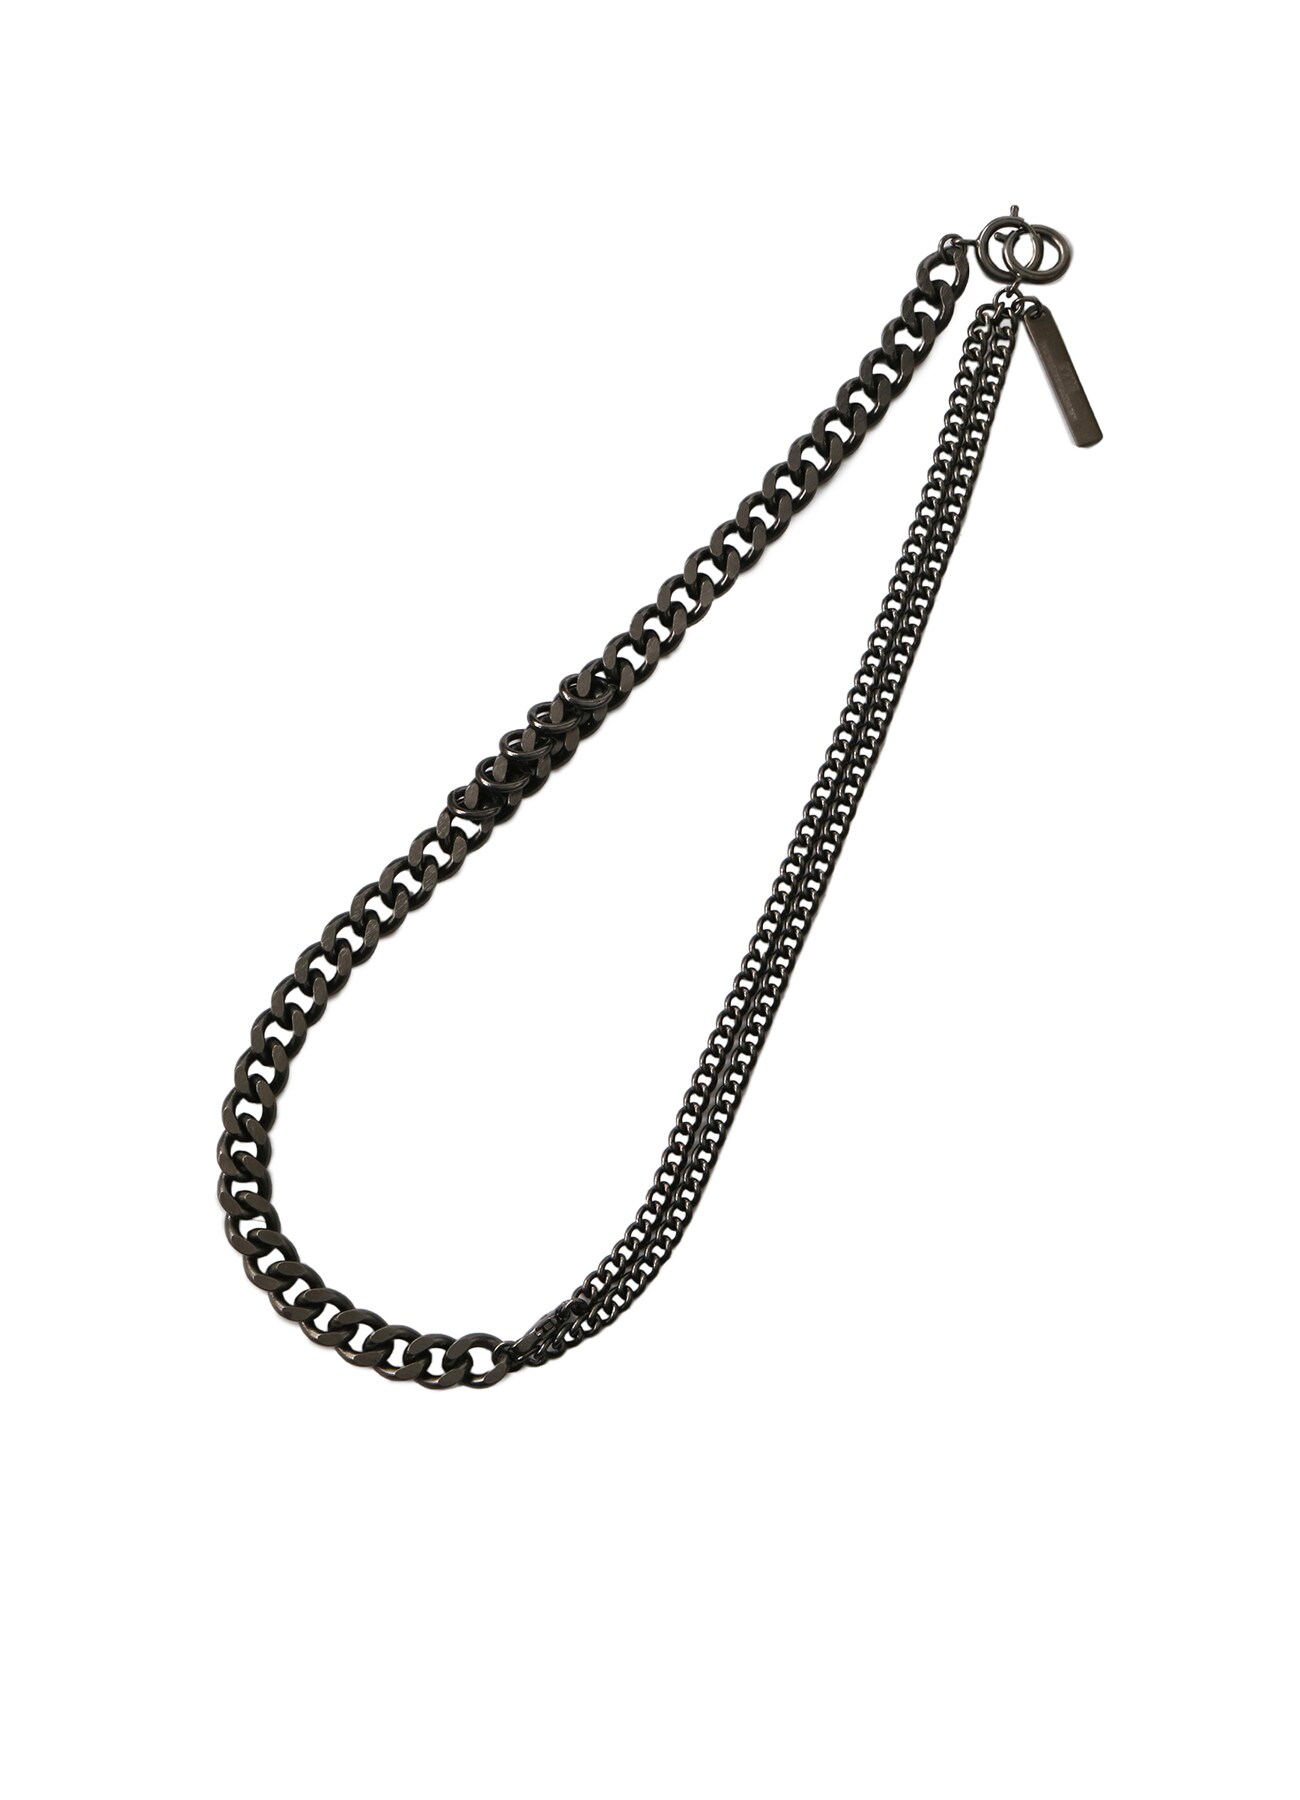 6-way Curved Chain Bracelet Necklaceネックレス